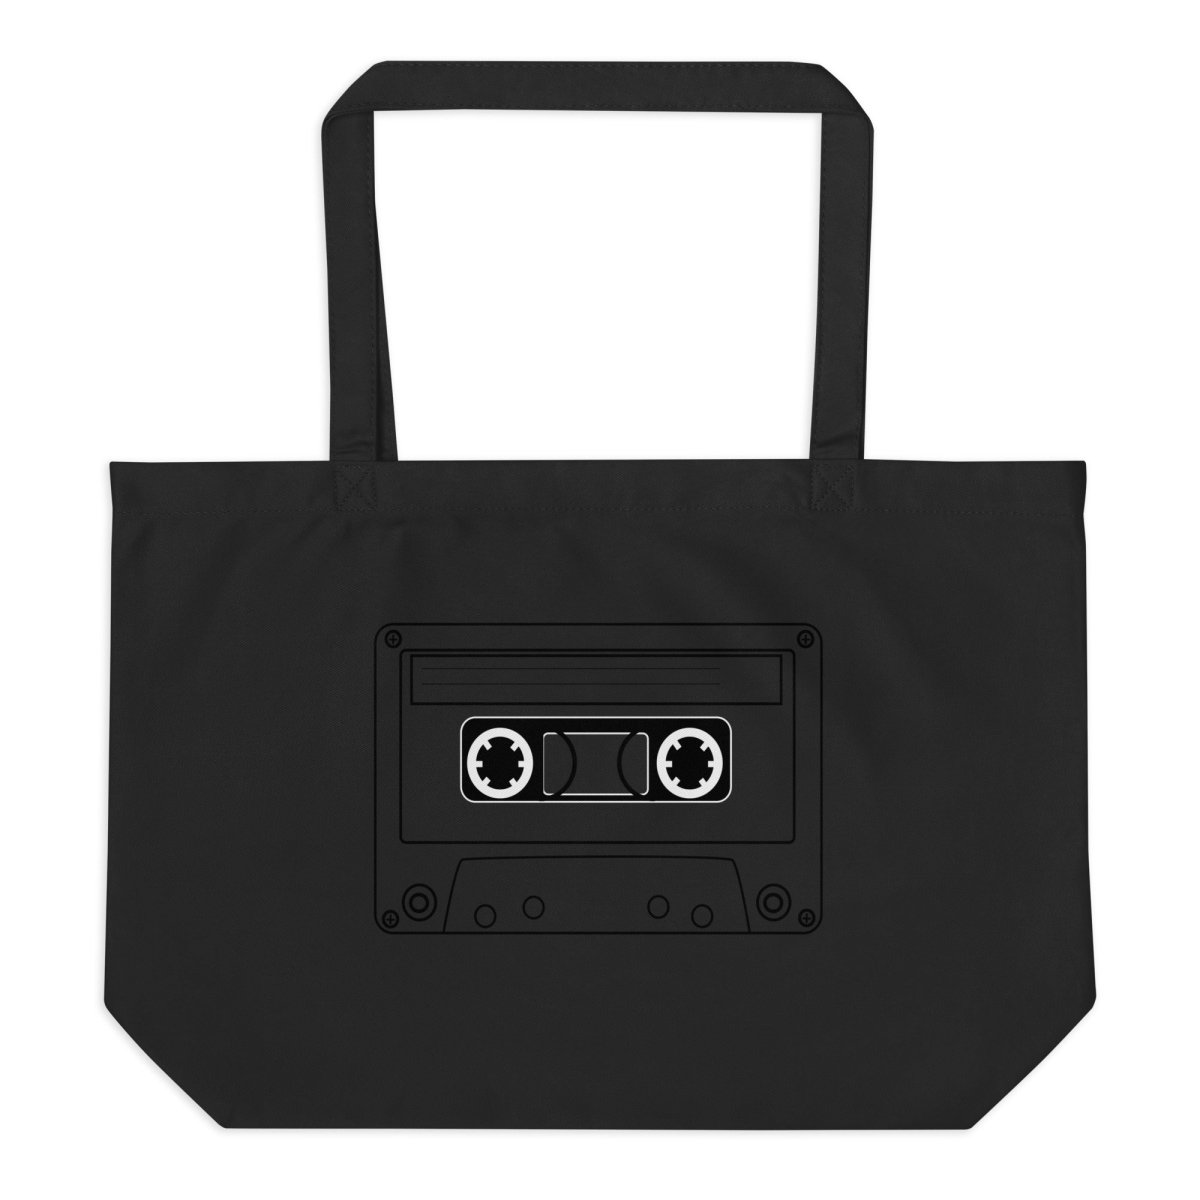 Sefira Music Large Organic Tote Bag | Sefira Beach Collection Accessories - Sefira Collections